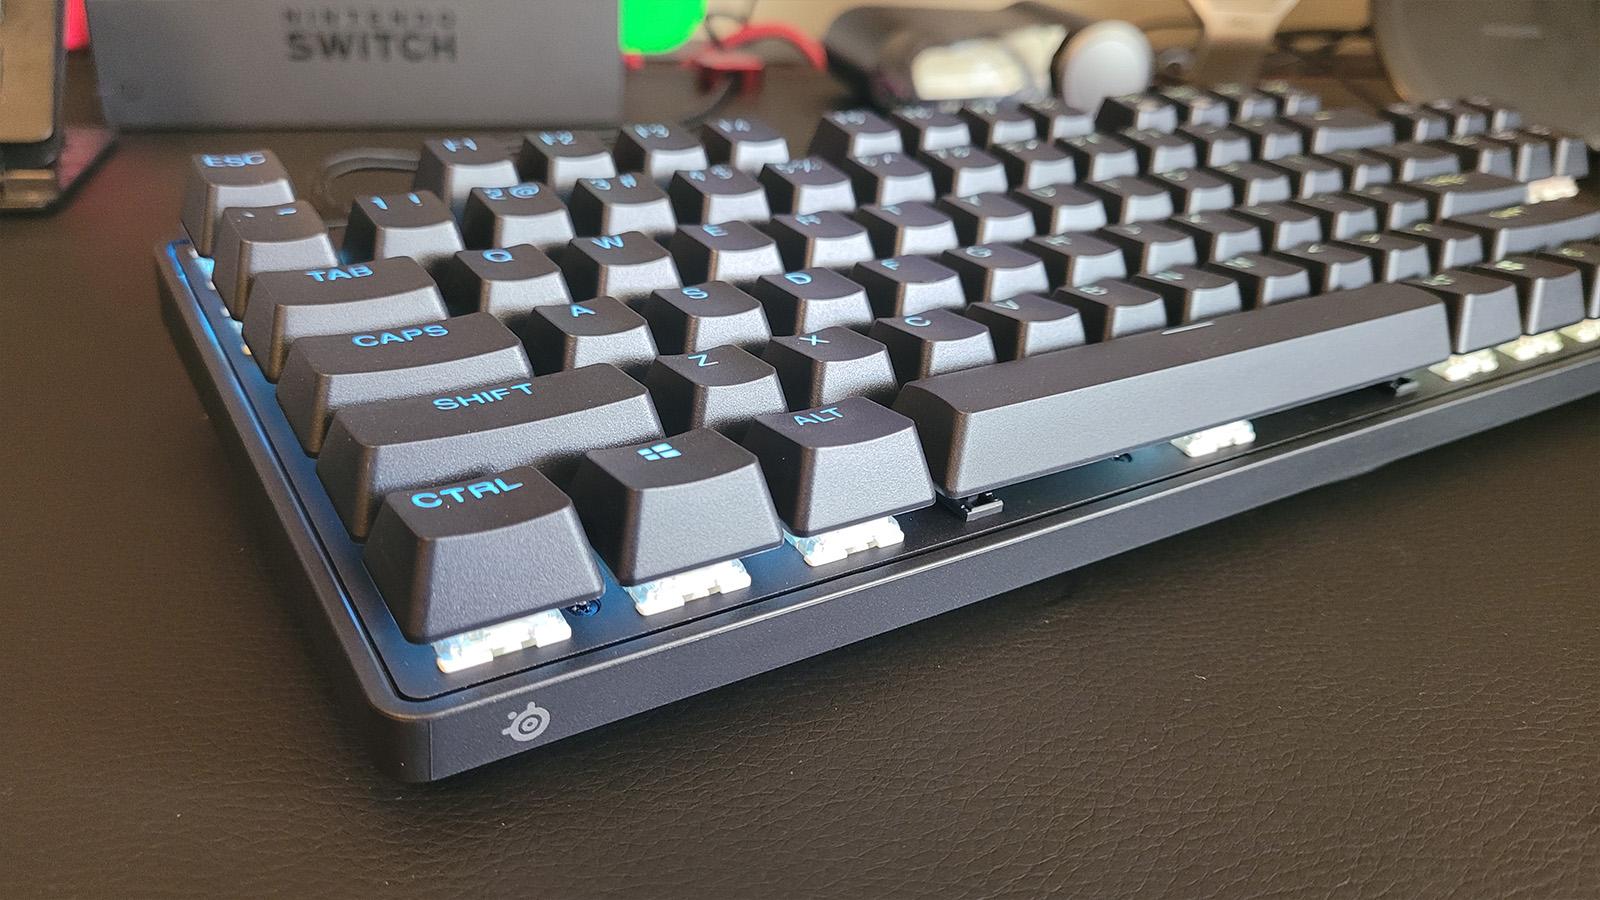 Fastest Optical Switch. Ever. The SteelSeries Apex 9 Mini and TKL